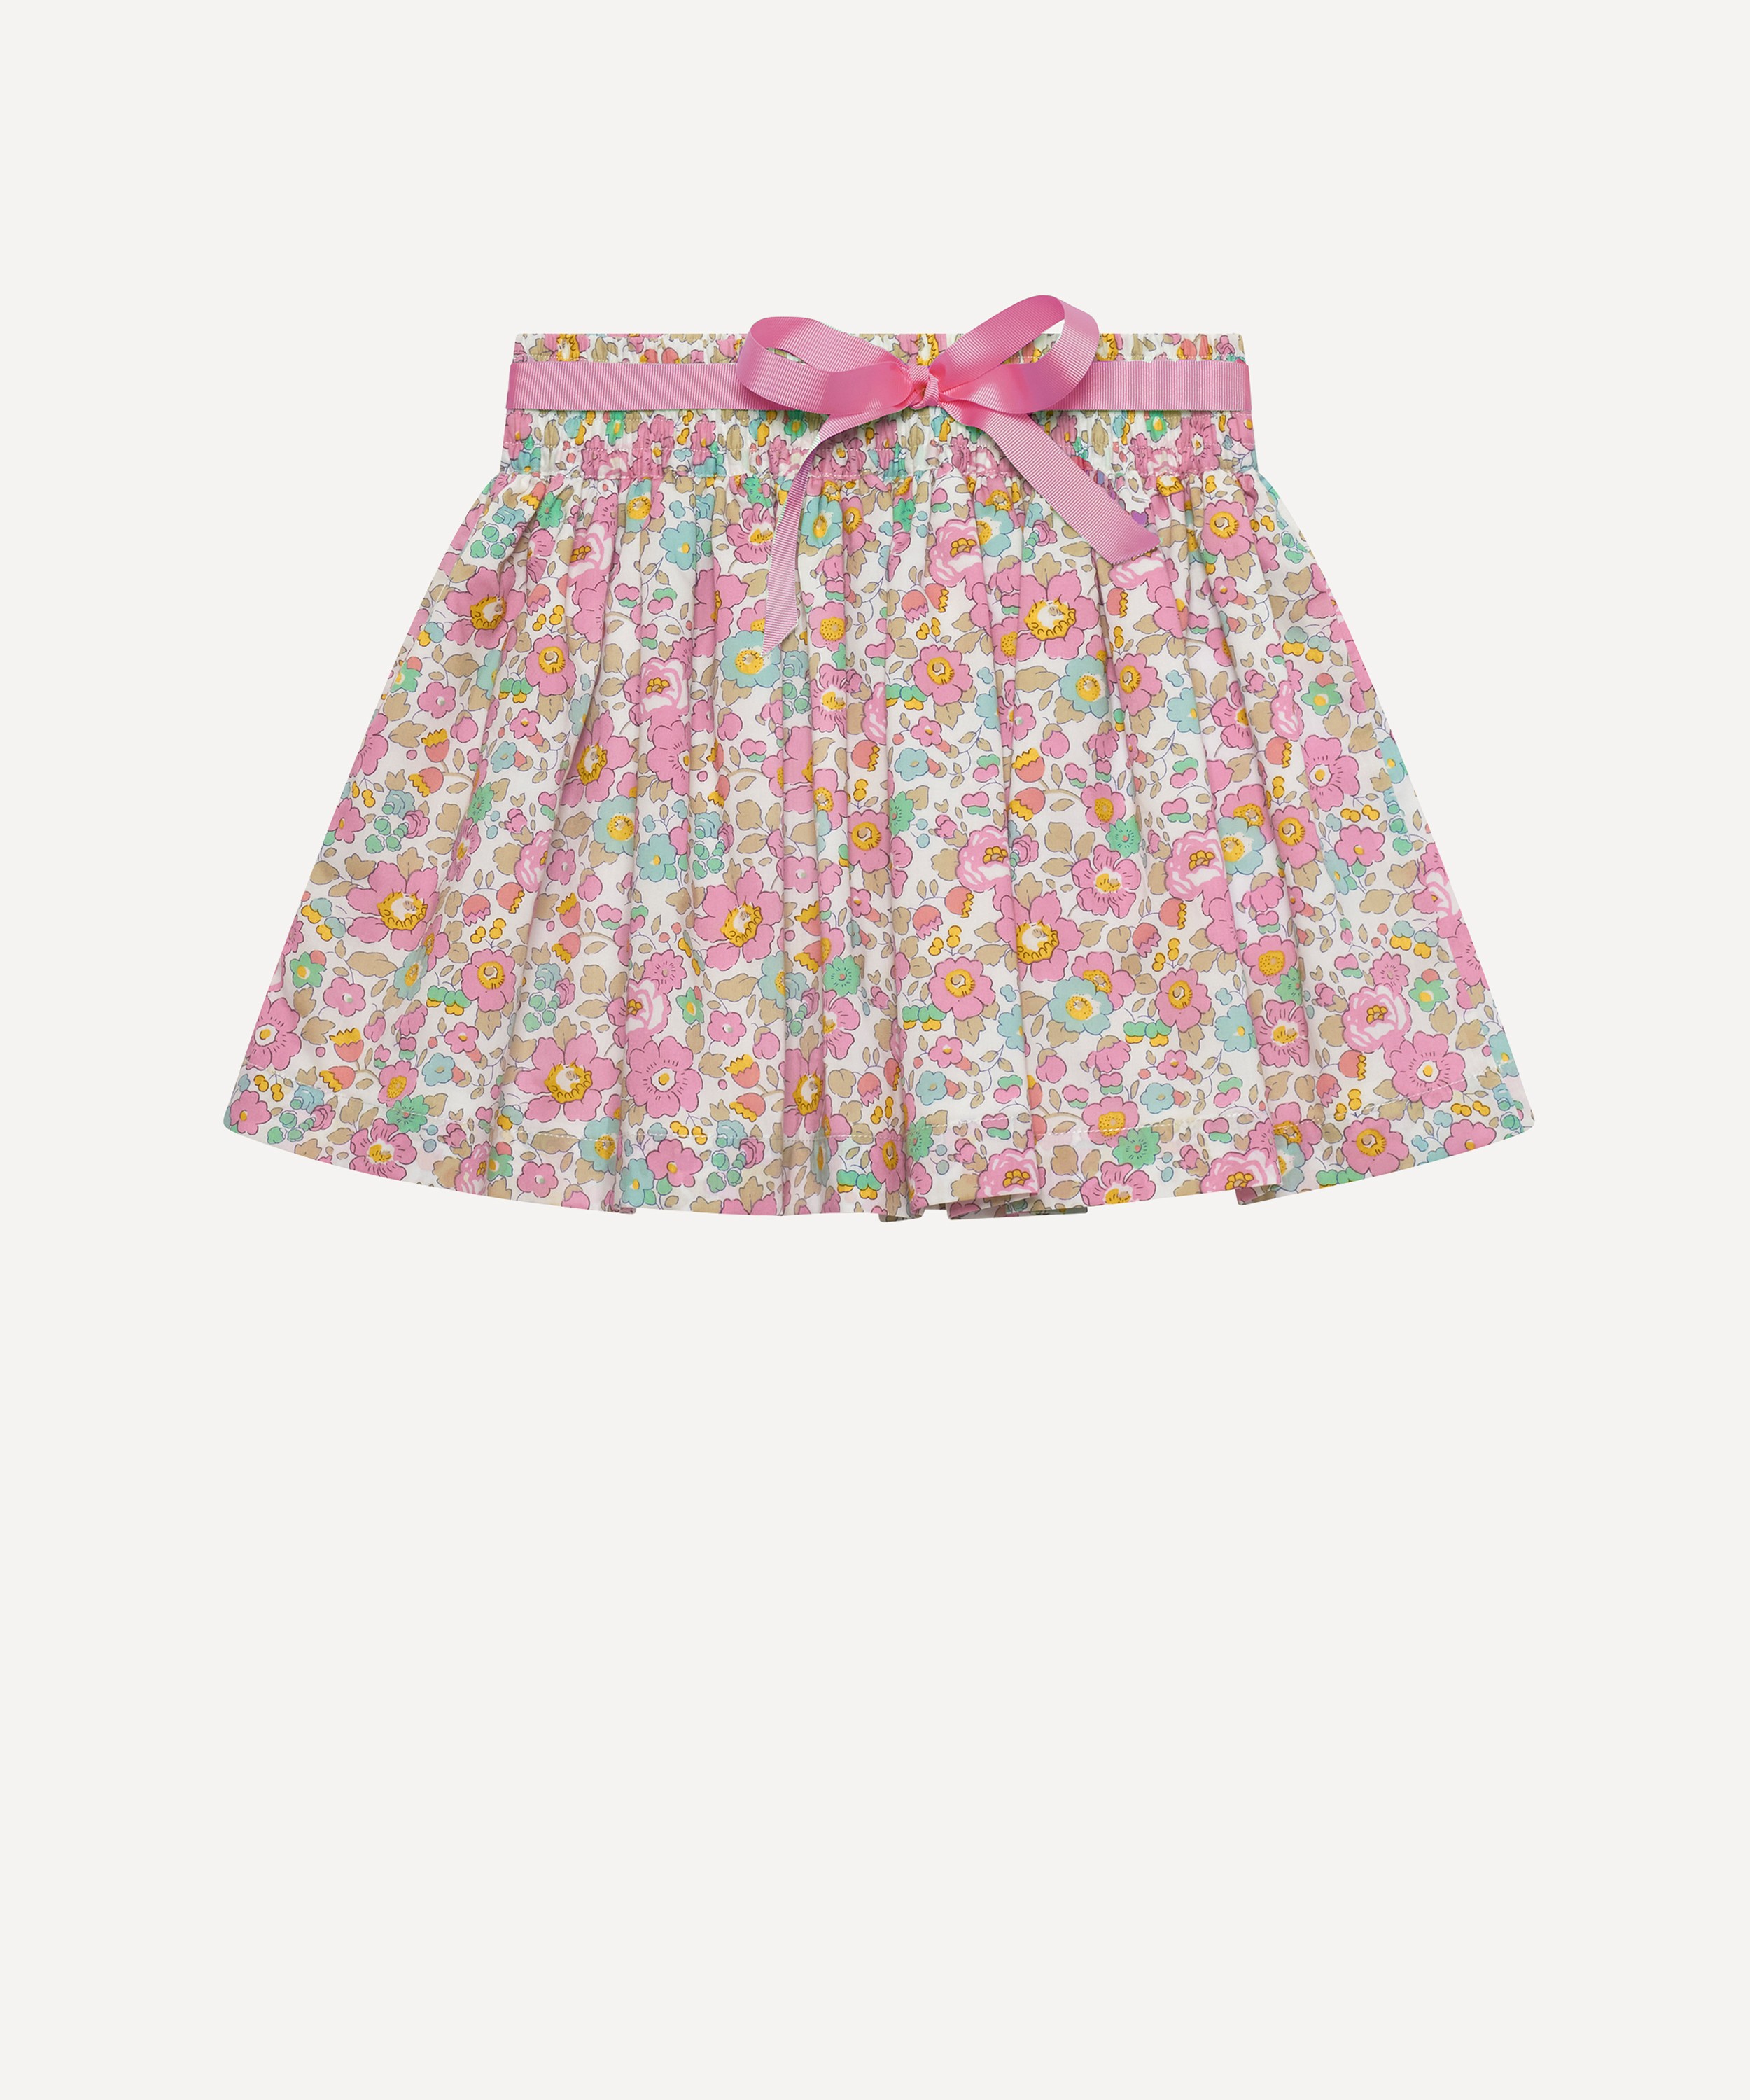 Trotters - Betsy Bow Skirt 8-11 Years image number 0